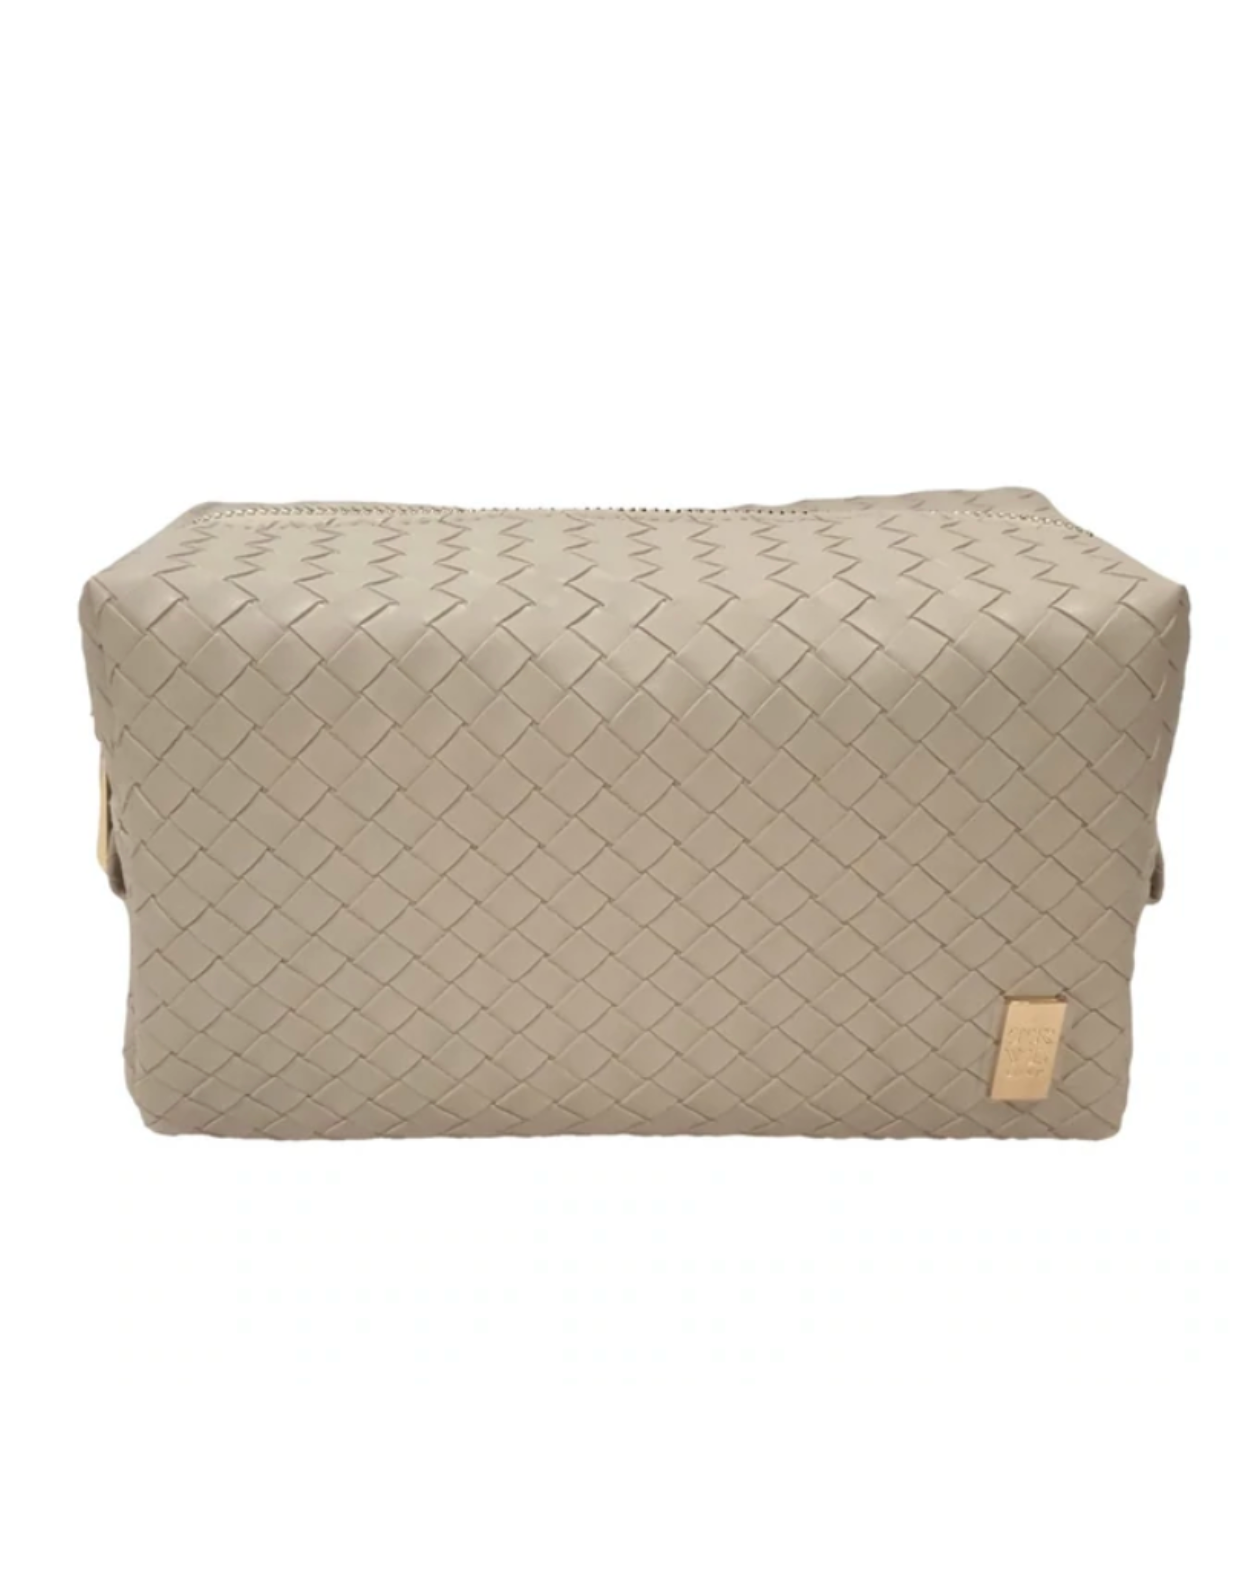 TOILETRY BAG DOME WOVEN BISQUE (Available in 2 Sizes)